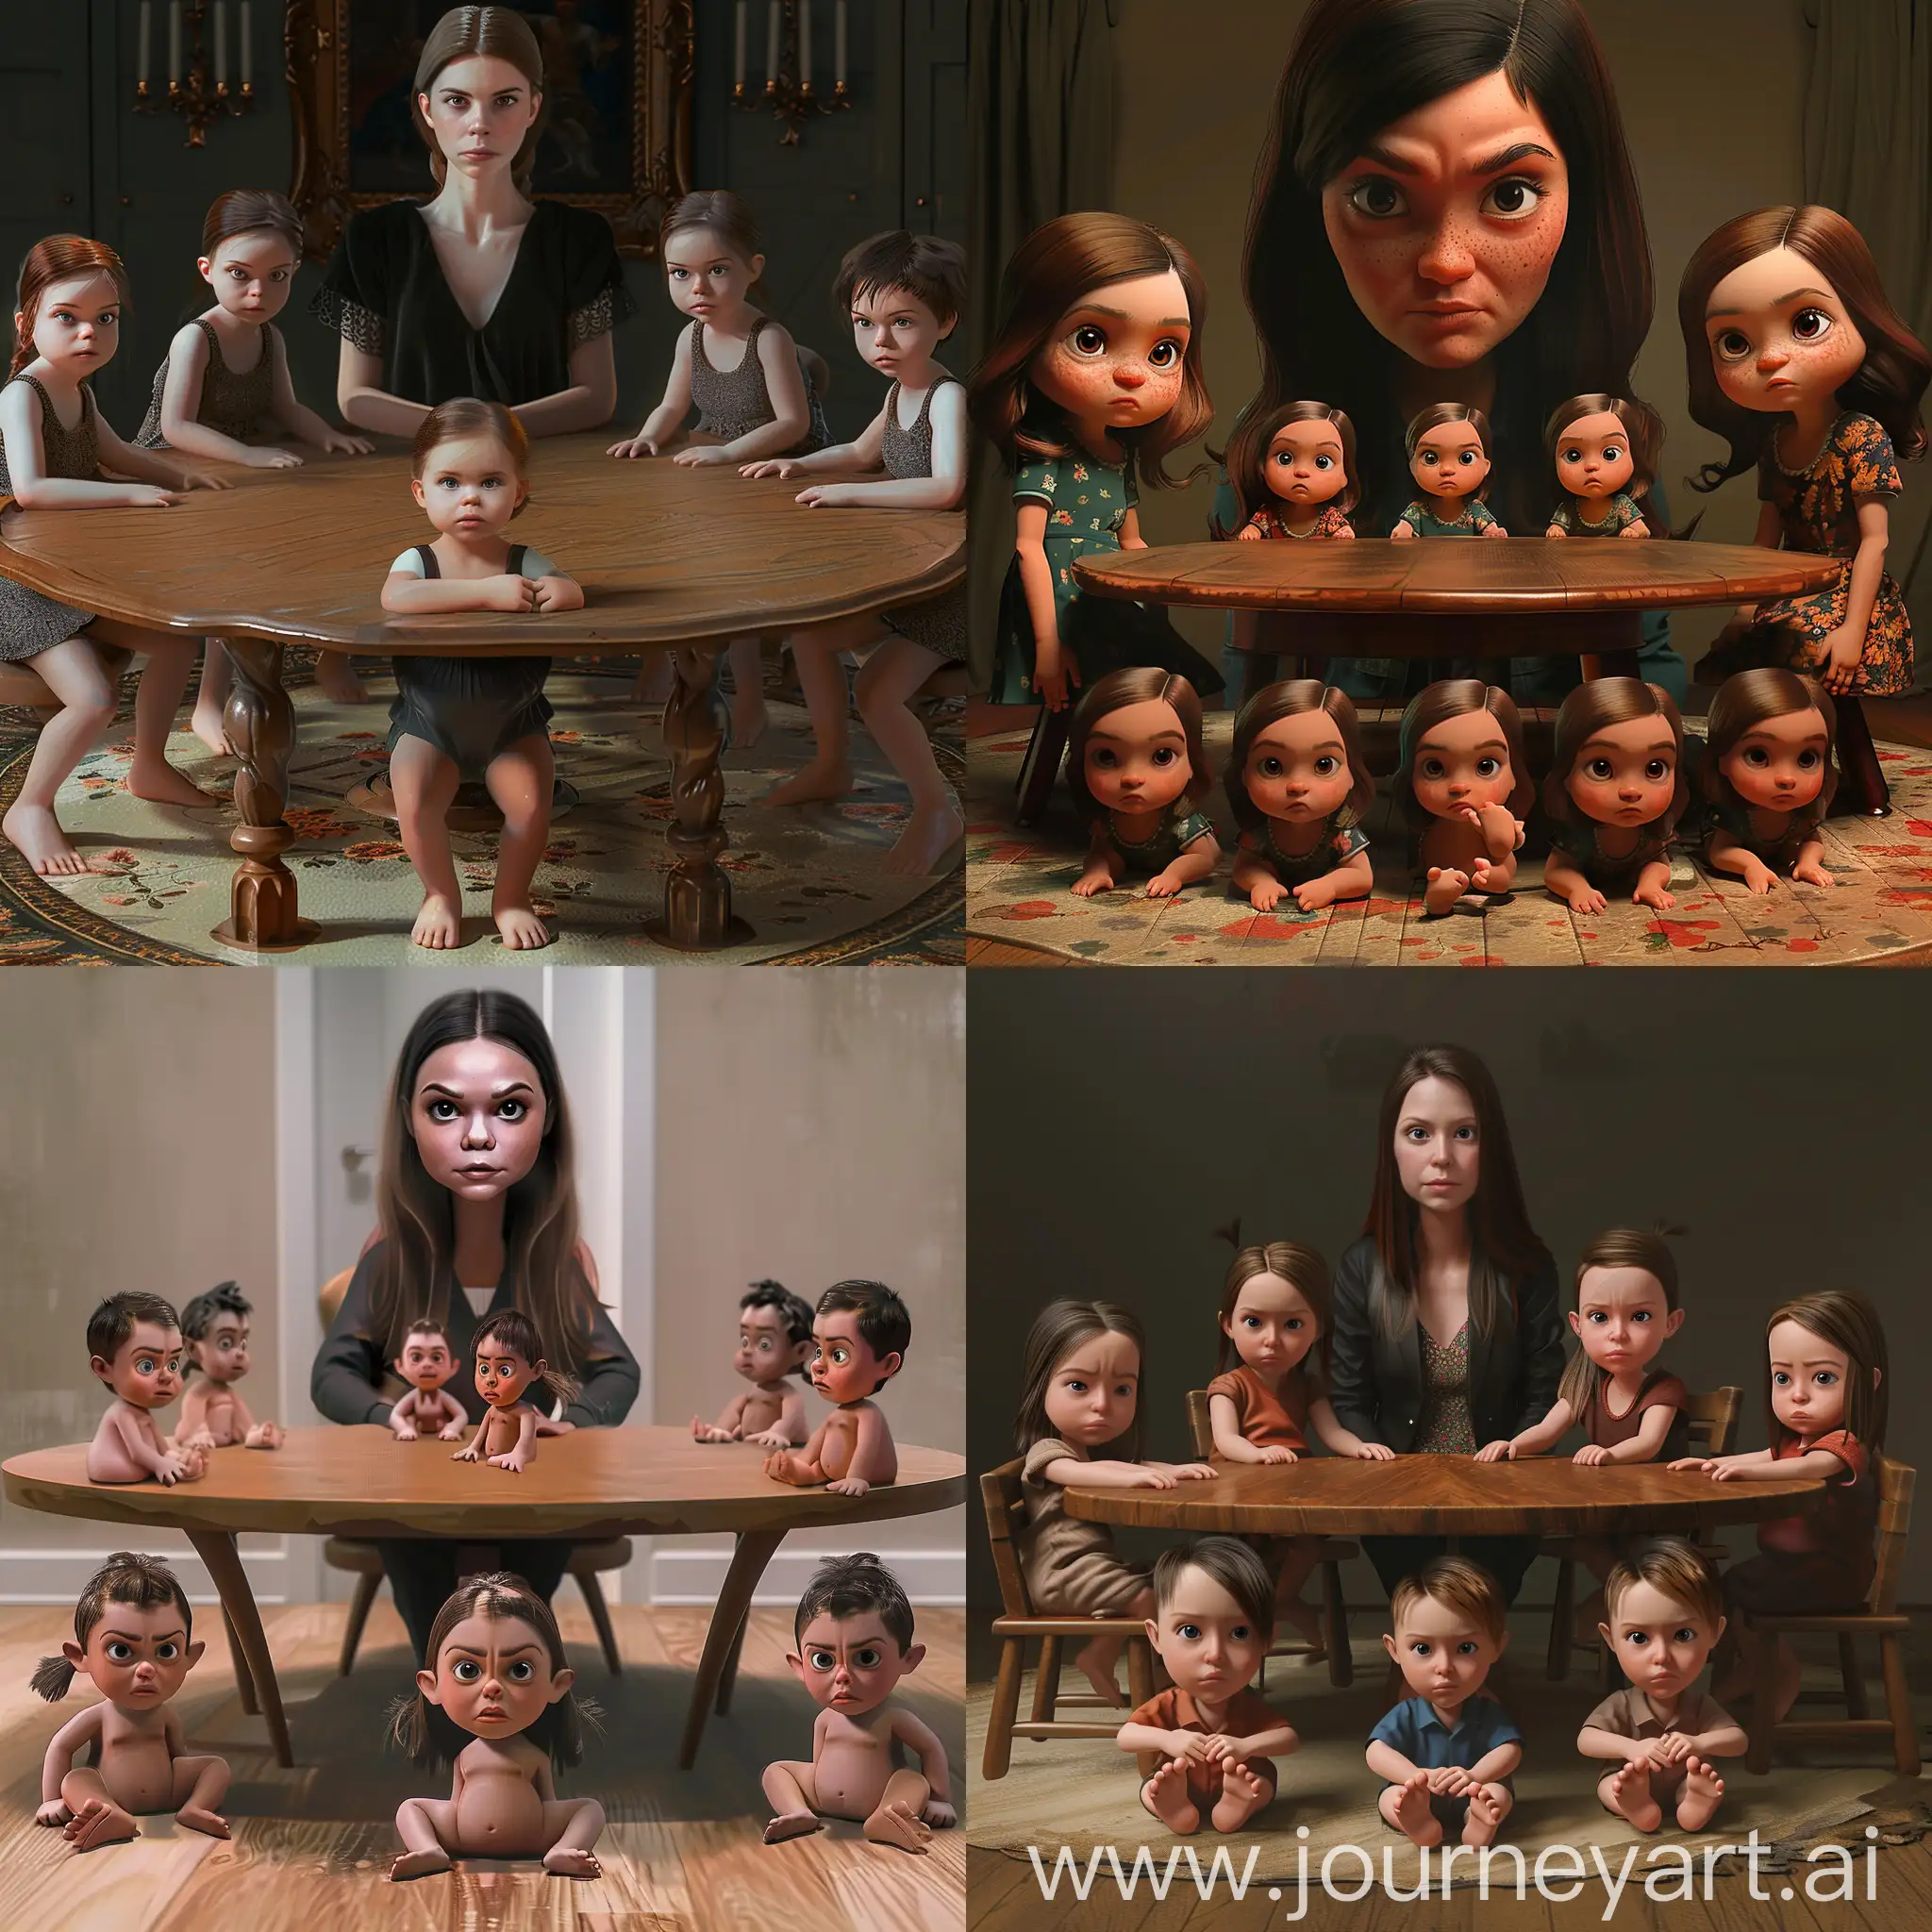 A real animation of 3 girls and 5 boys with baby bodies and adult faces (similar to the animation of the boss's child) along with an adult woman in the middle of the picture, whose facial expressions are all serious, and they are all sitting around a round table and looking at the camera. Two of the people sitting in front of the table have turned to look at the camera.
I repeat that the total number of people is 9 people and the little feet of the children are visible from under the table.